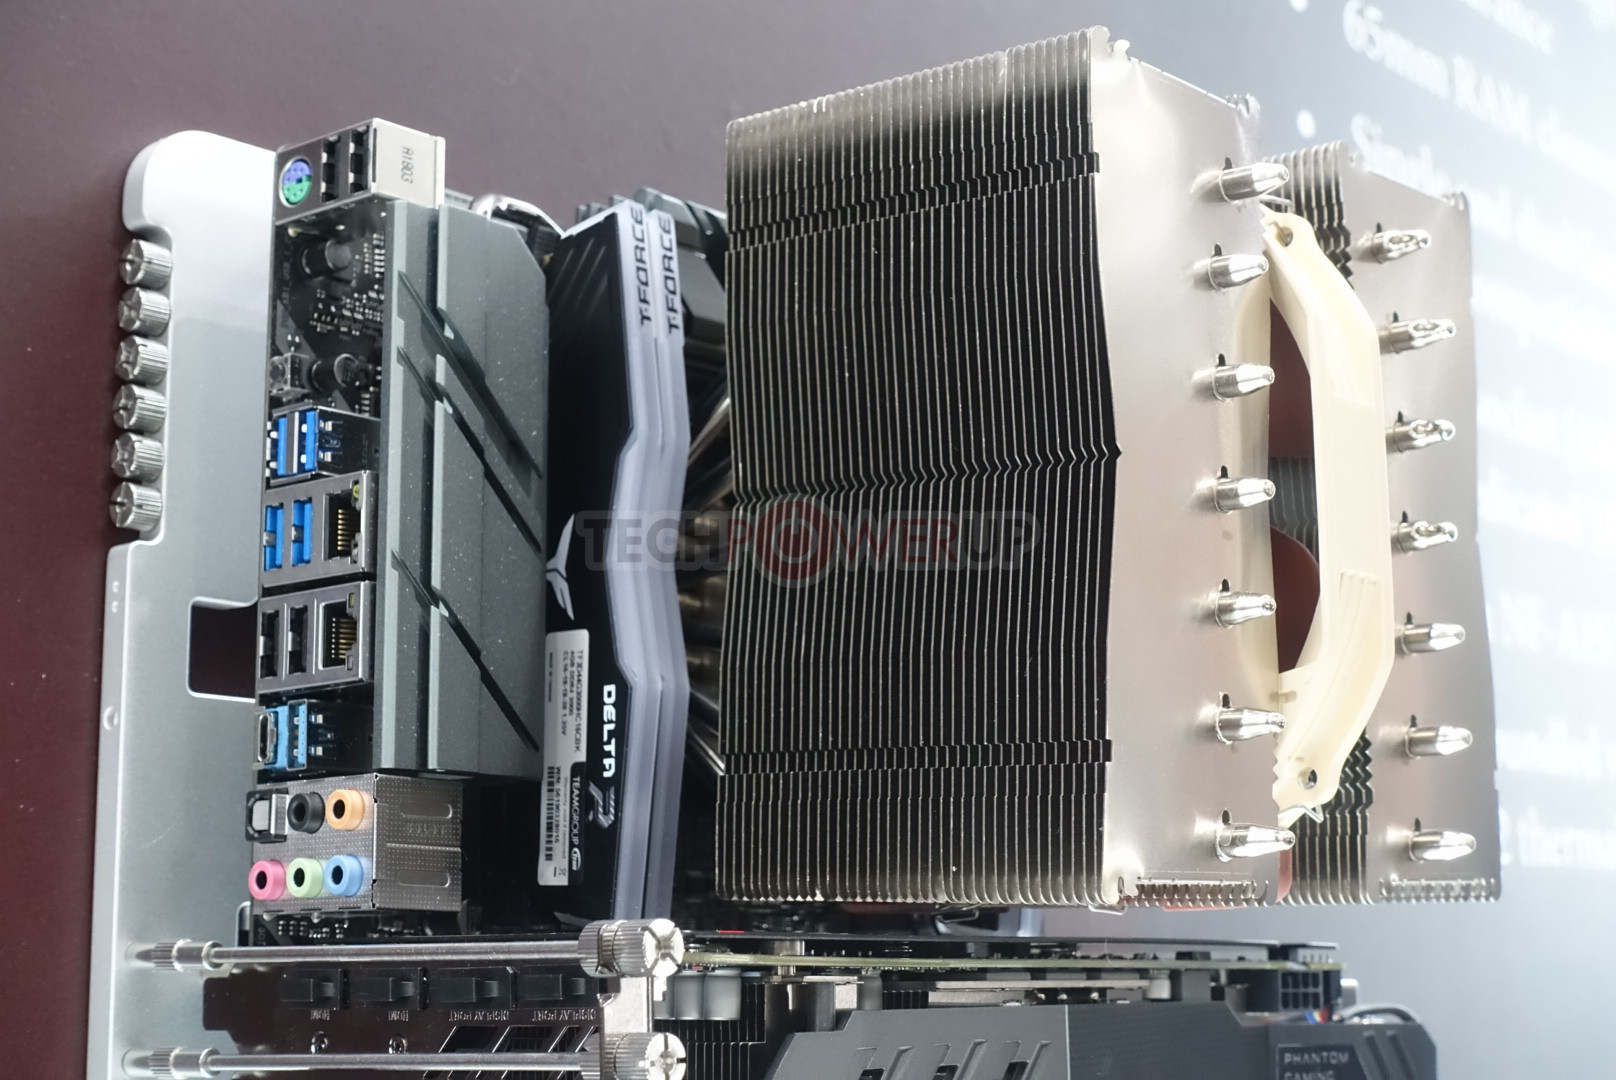 Domar adherirse En consecuencia Noctua Showcases Next Generation of D-type Coolers, Chromax Coolers and  More at Computex